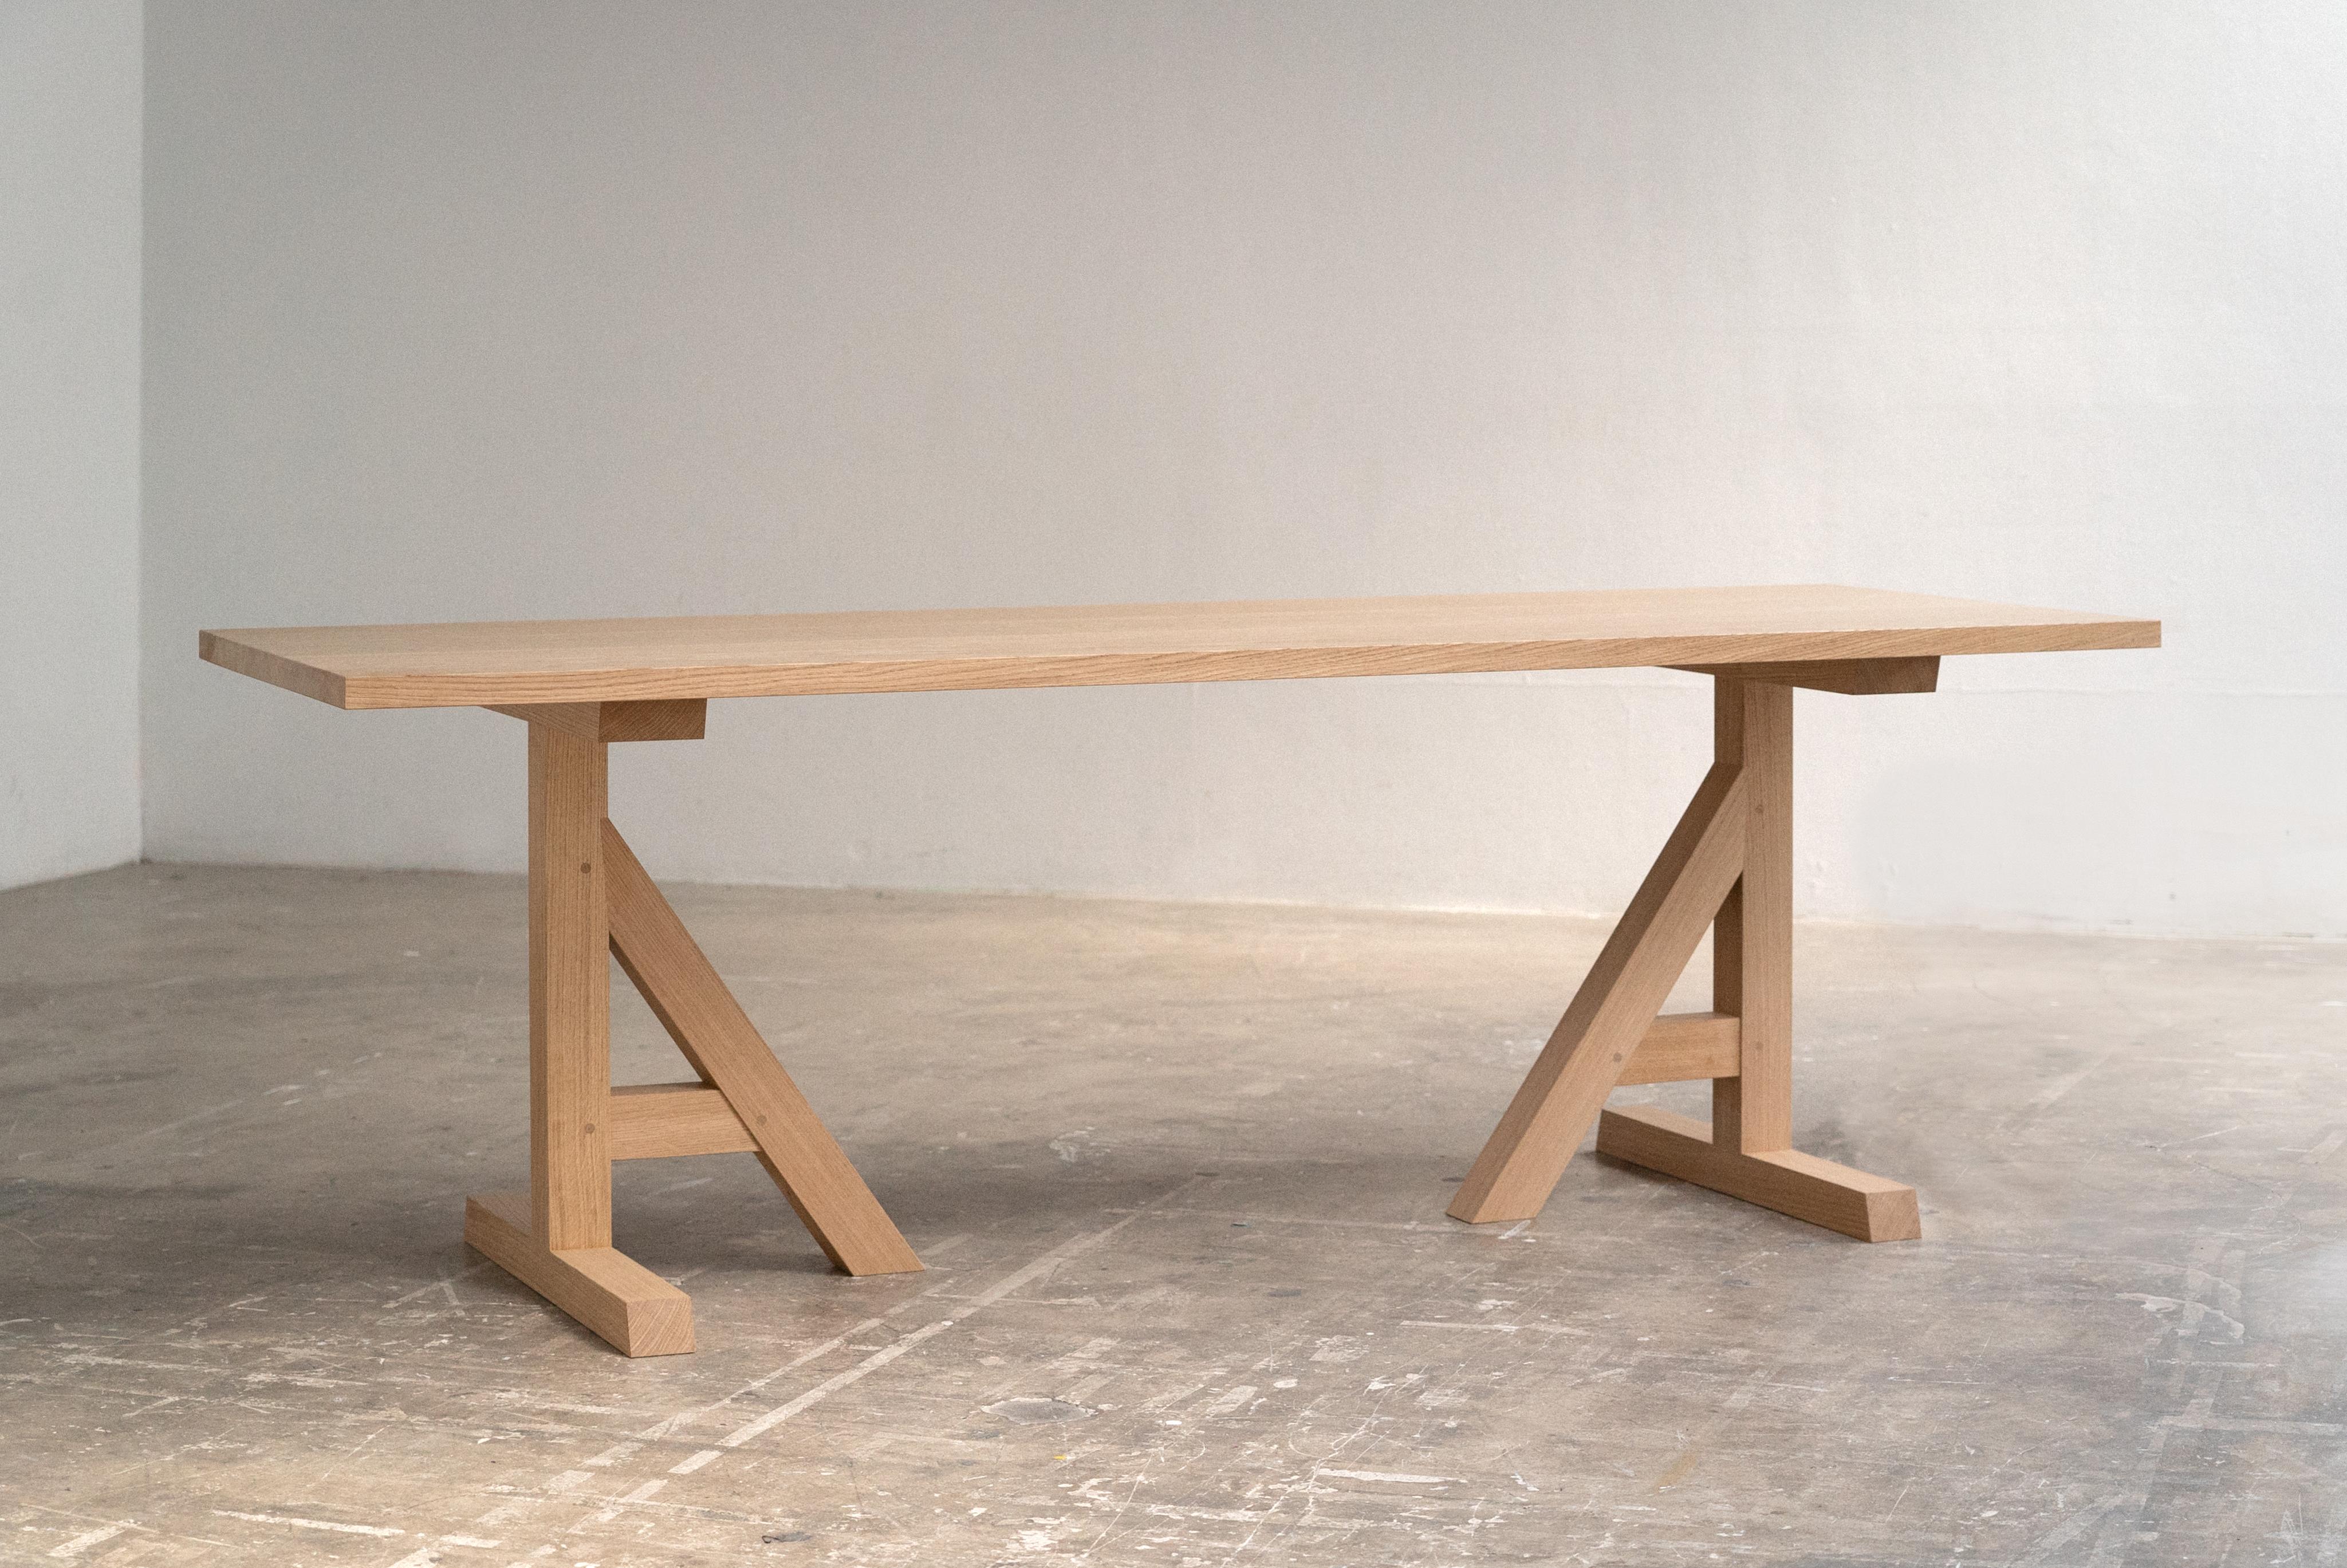 Hand-Crafted Handcrafted English Oak Table For Sale